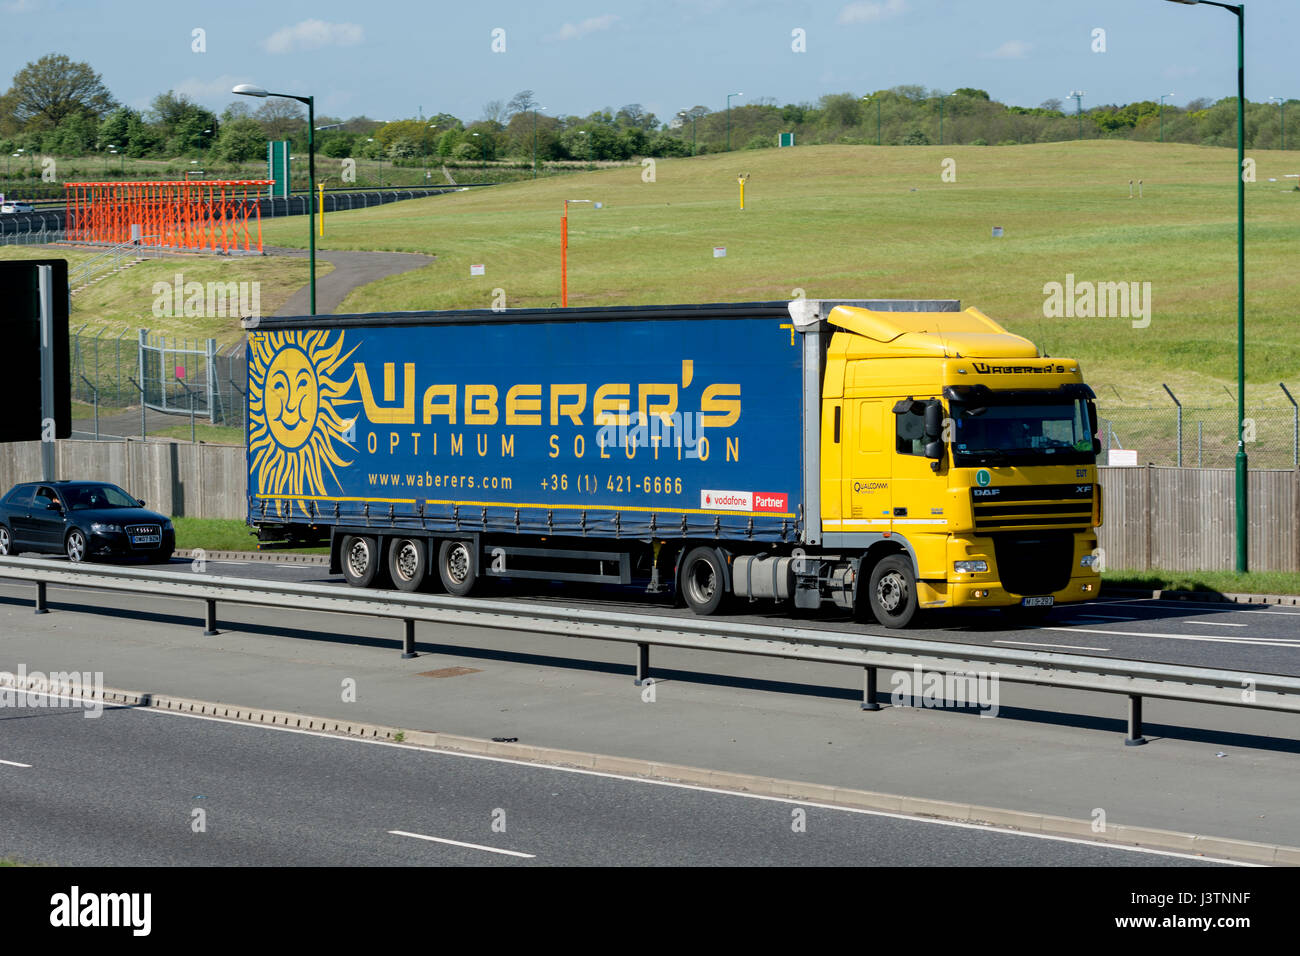 A Waberer`s lorry on the A45 road, West Midlands, England, UK Stock Photo